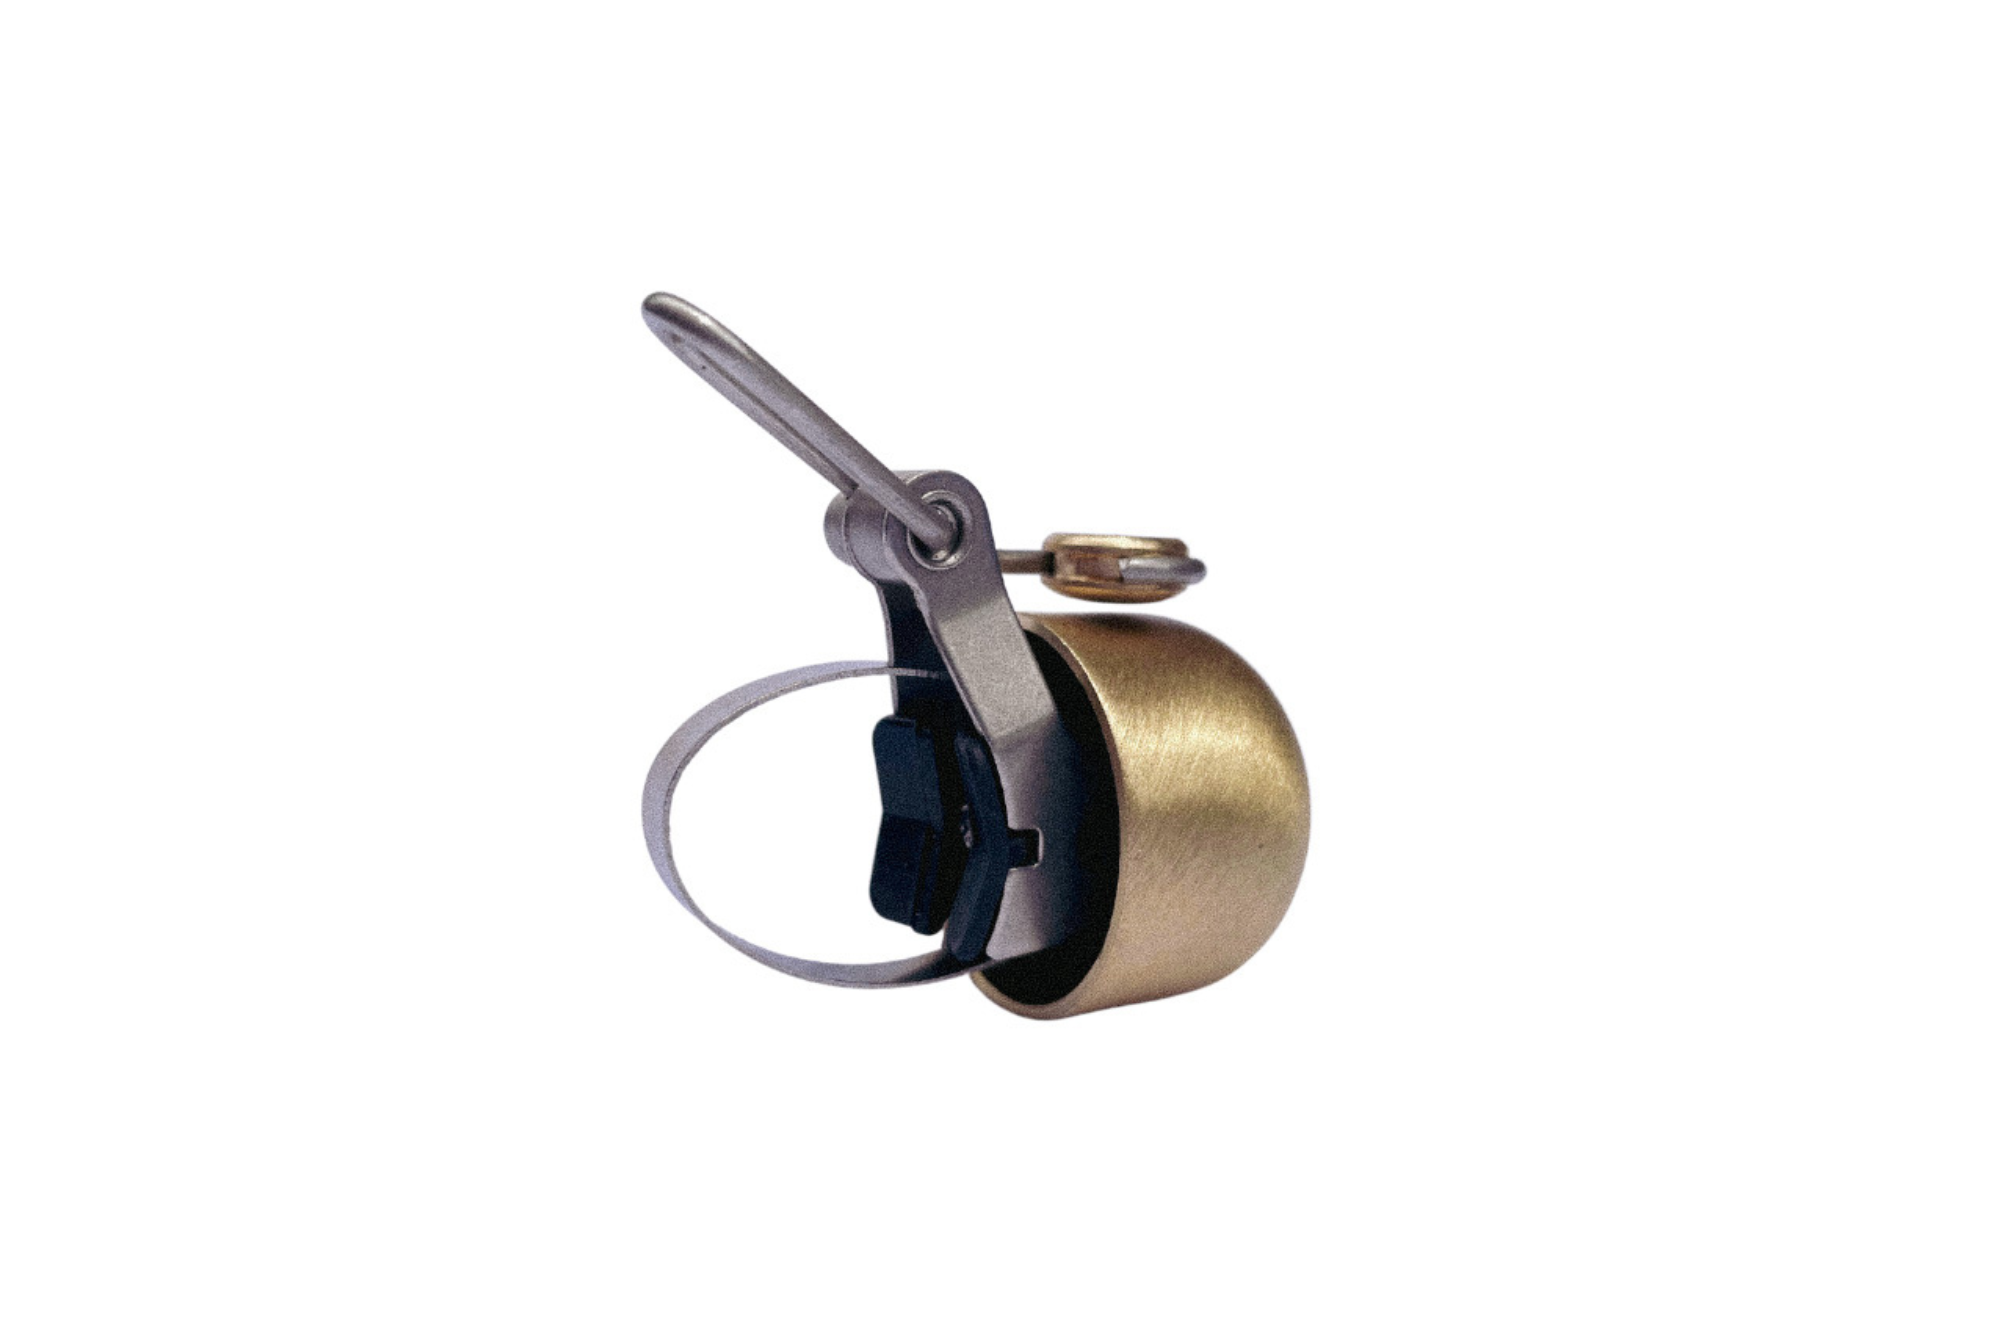 The bell is made of high quality Material - Copper. This bell is easy to use and is convenient to carry. It is 62 mm x 30 mm x 35 mm in size and weighs about 200 gms.